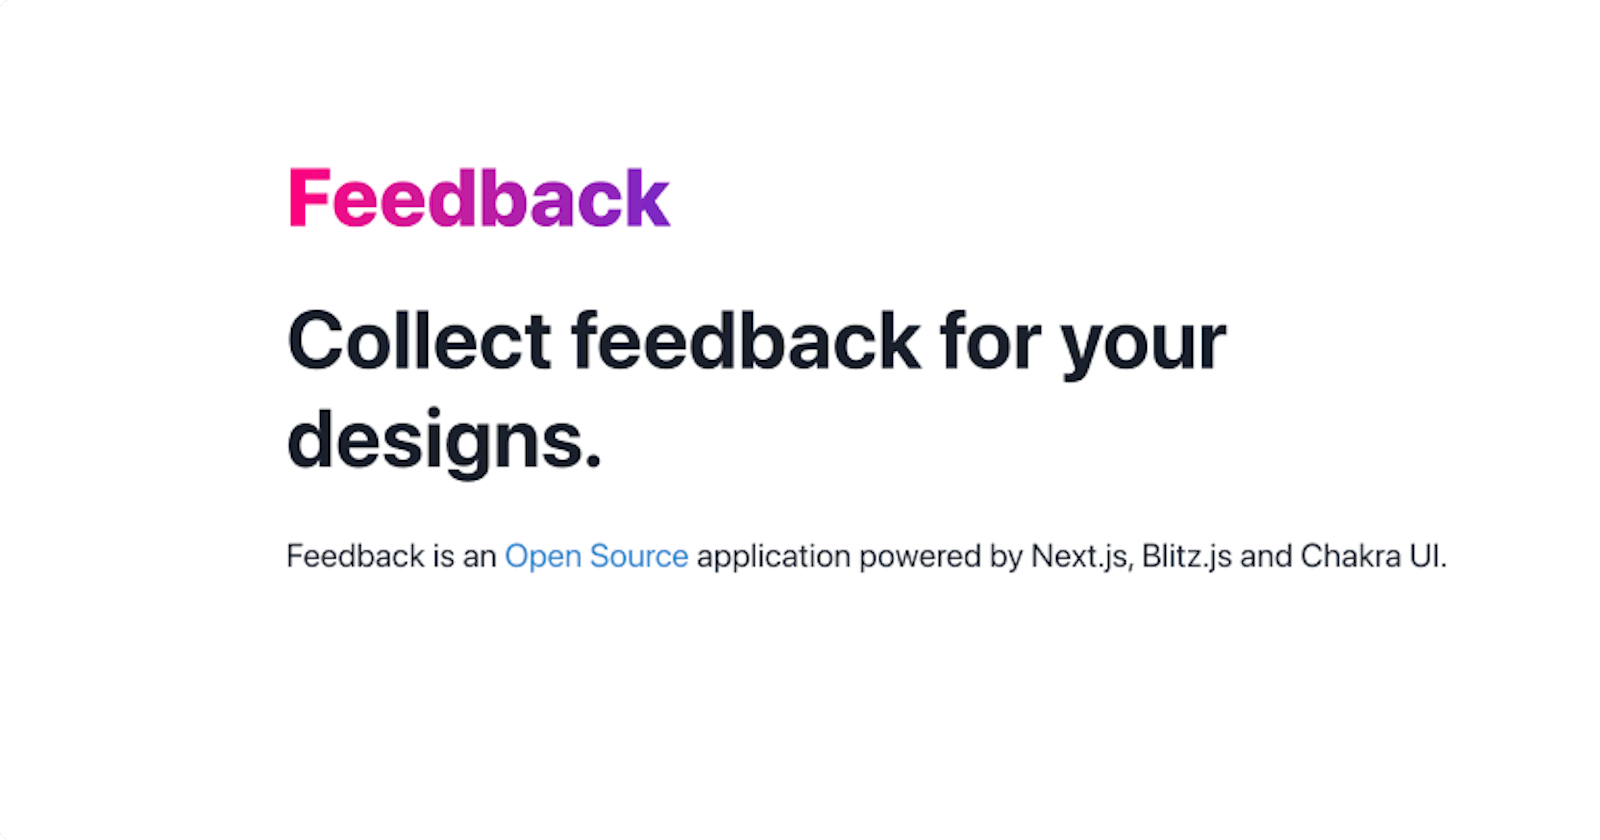 Create an app to collect feedback for your designs